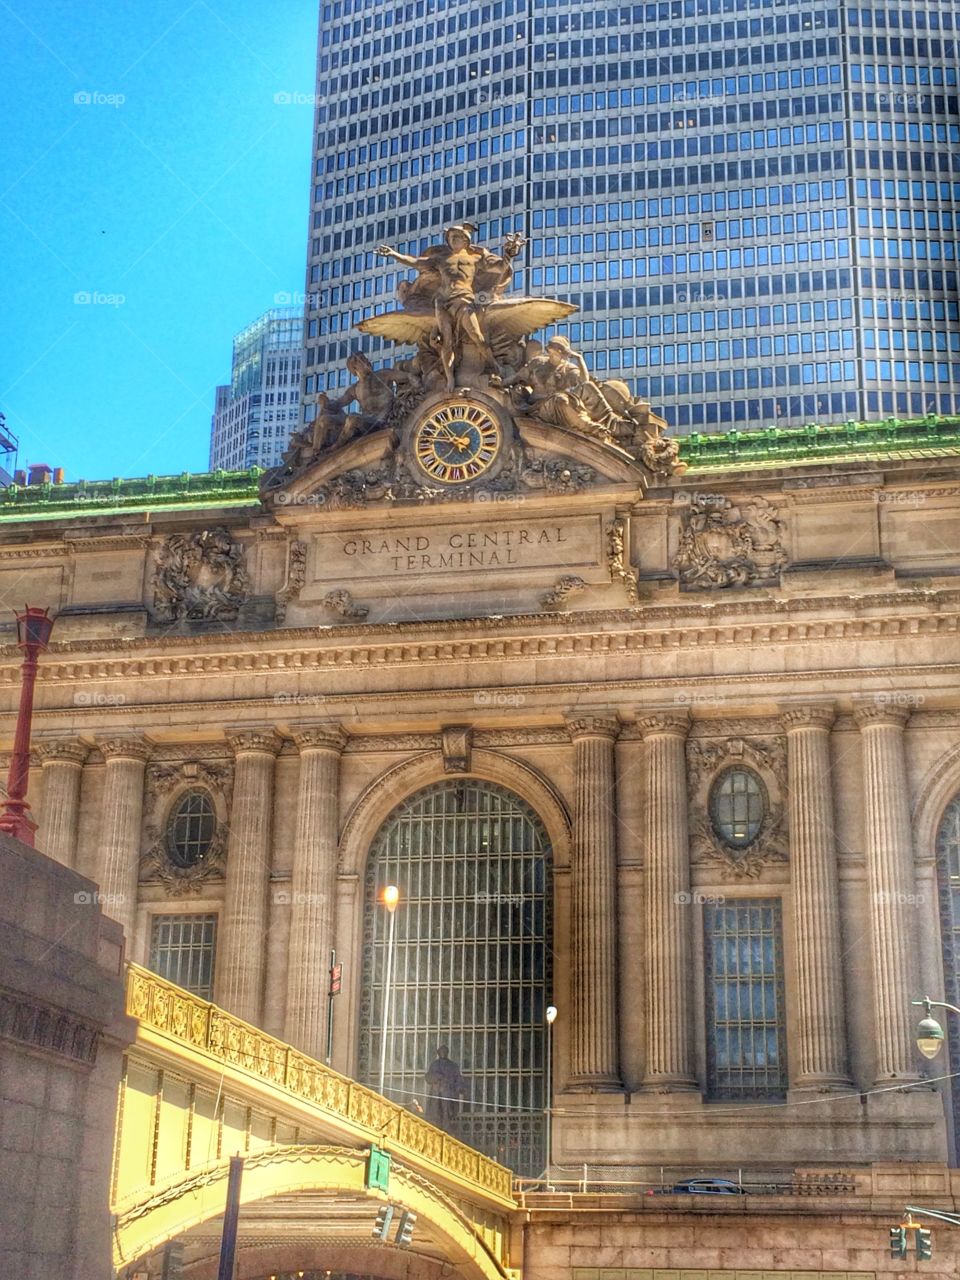 Grand Central Station terminal building in New York City